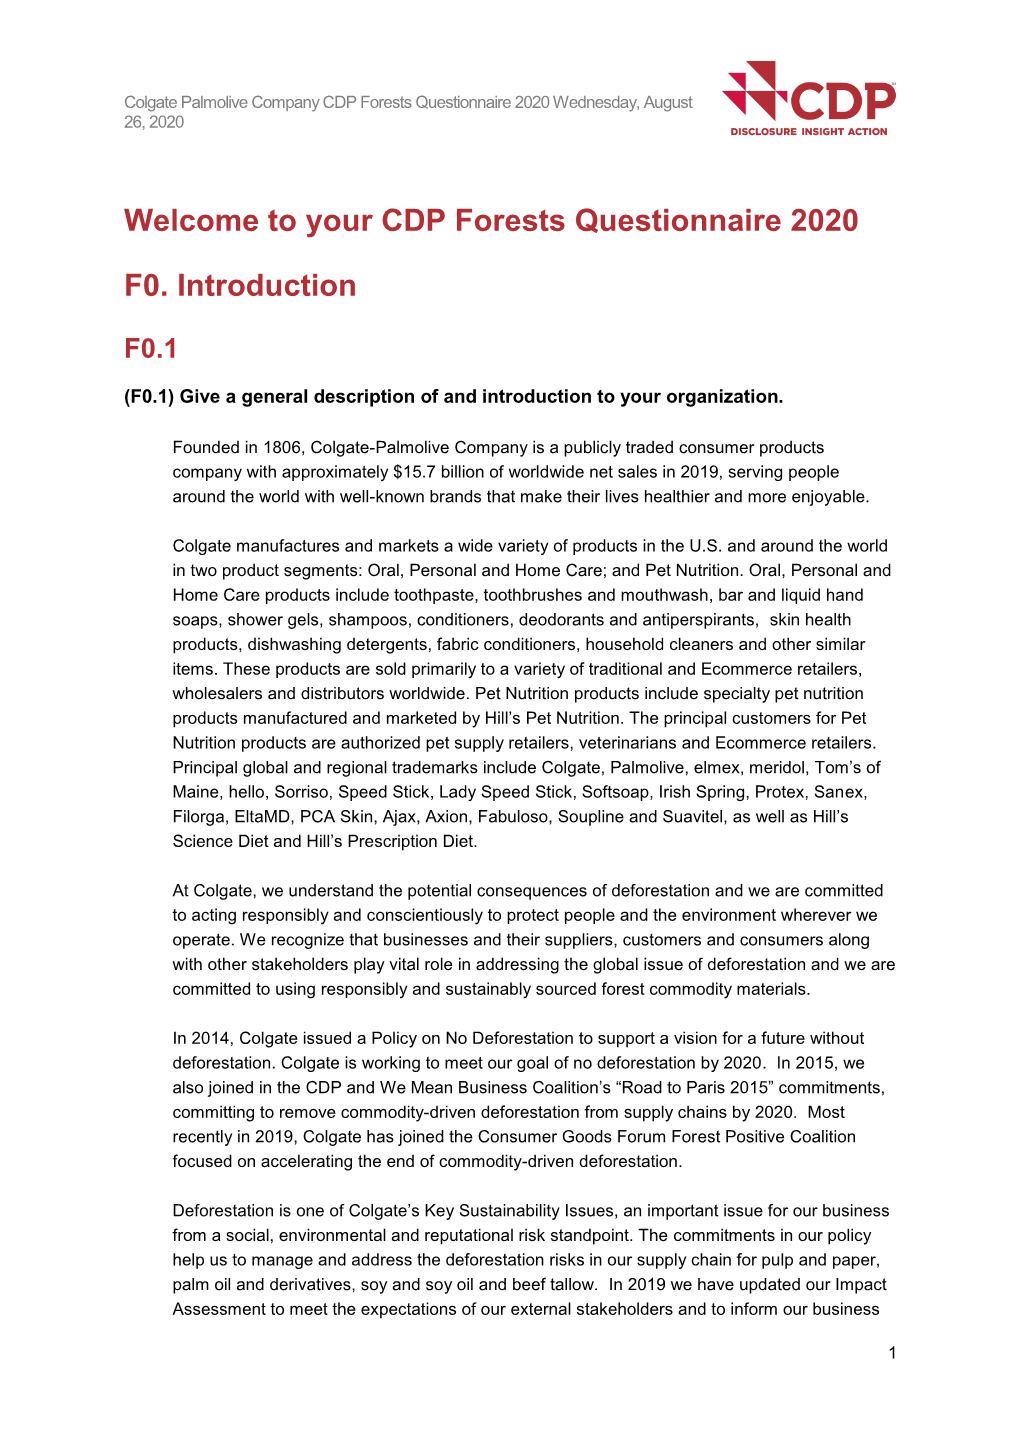 CDP Forest 2020